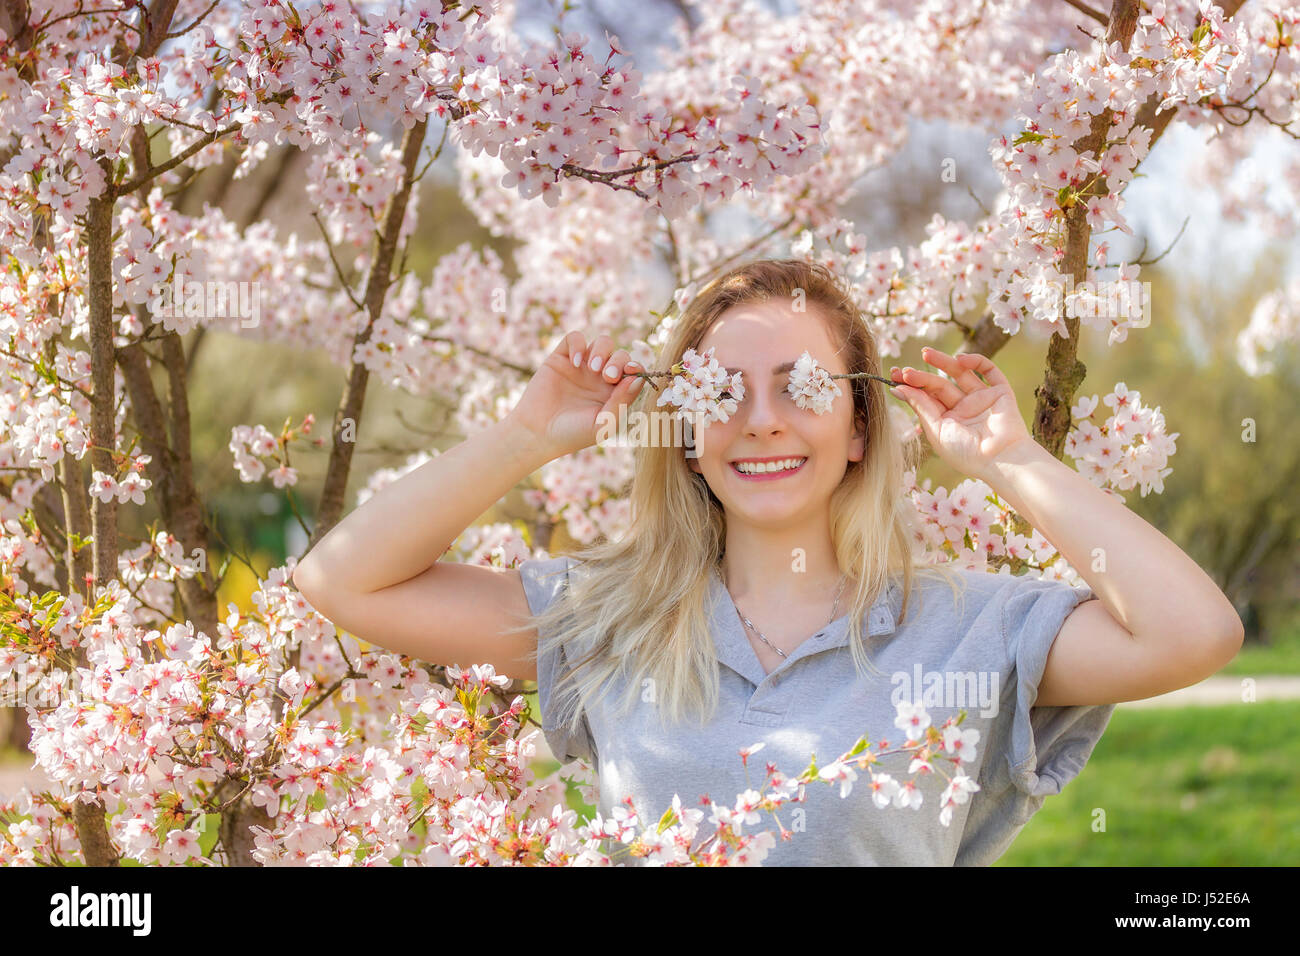 Young woman covering her eyes with fresh colorful flowers. Stock Photo